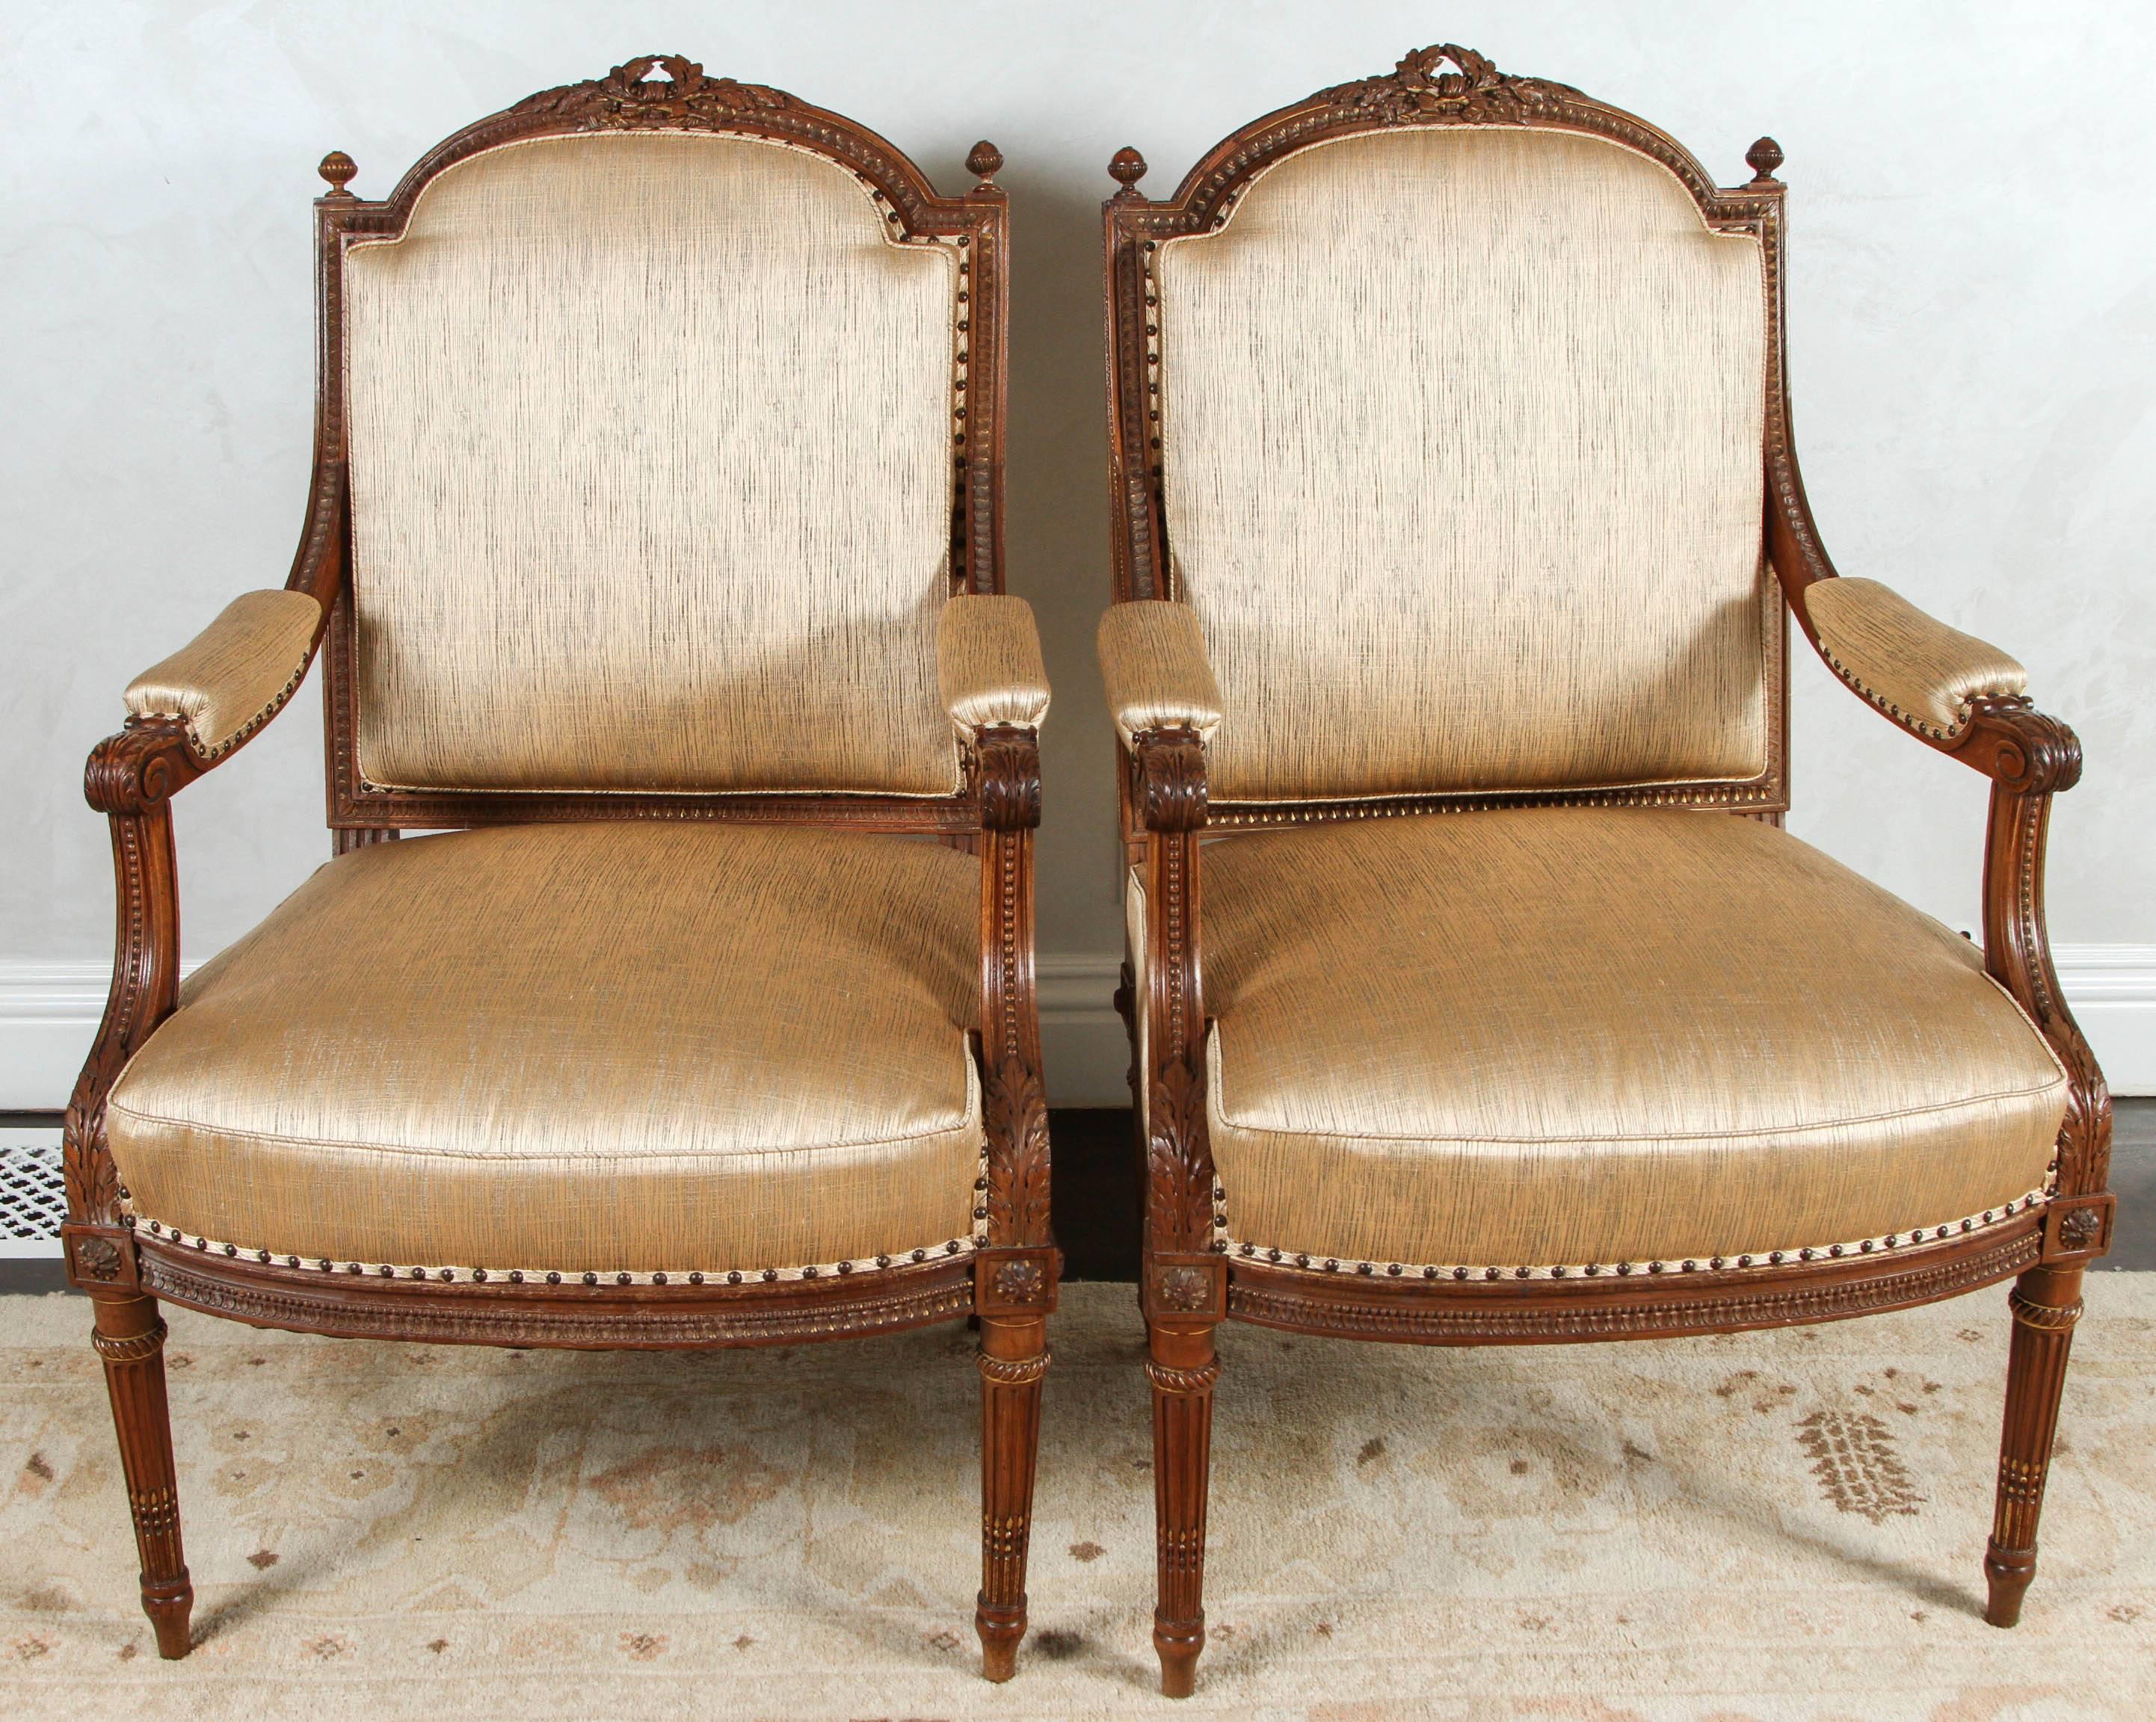 Pair of 19th century French finely carved walnut armchairs with acanthus leaf and ribbon motif. The chairs are finished with nail heads and have been newly upholstered with  silk matte gold fabric. The price in this listing is for one pair only but